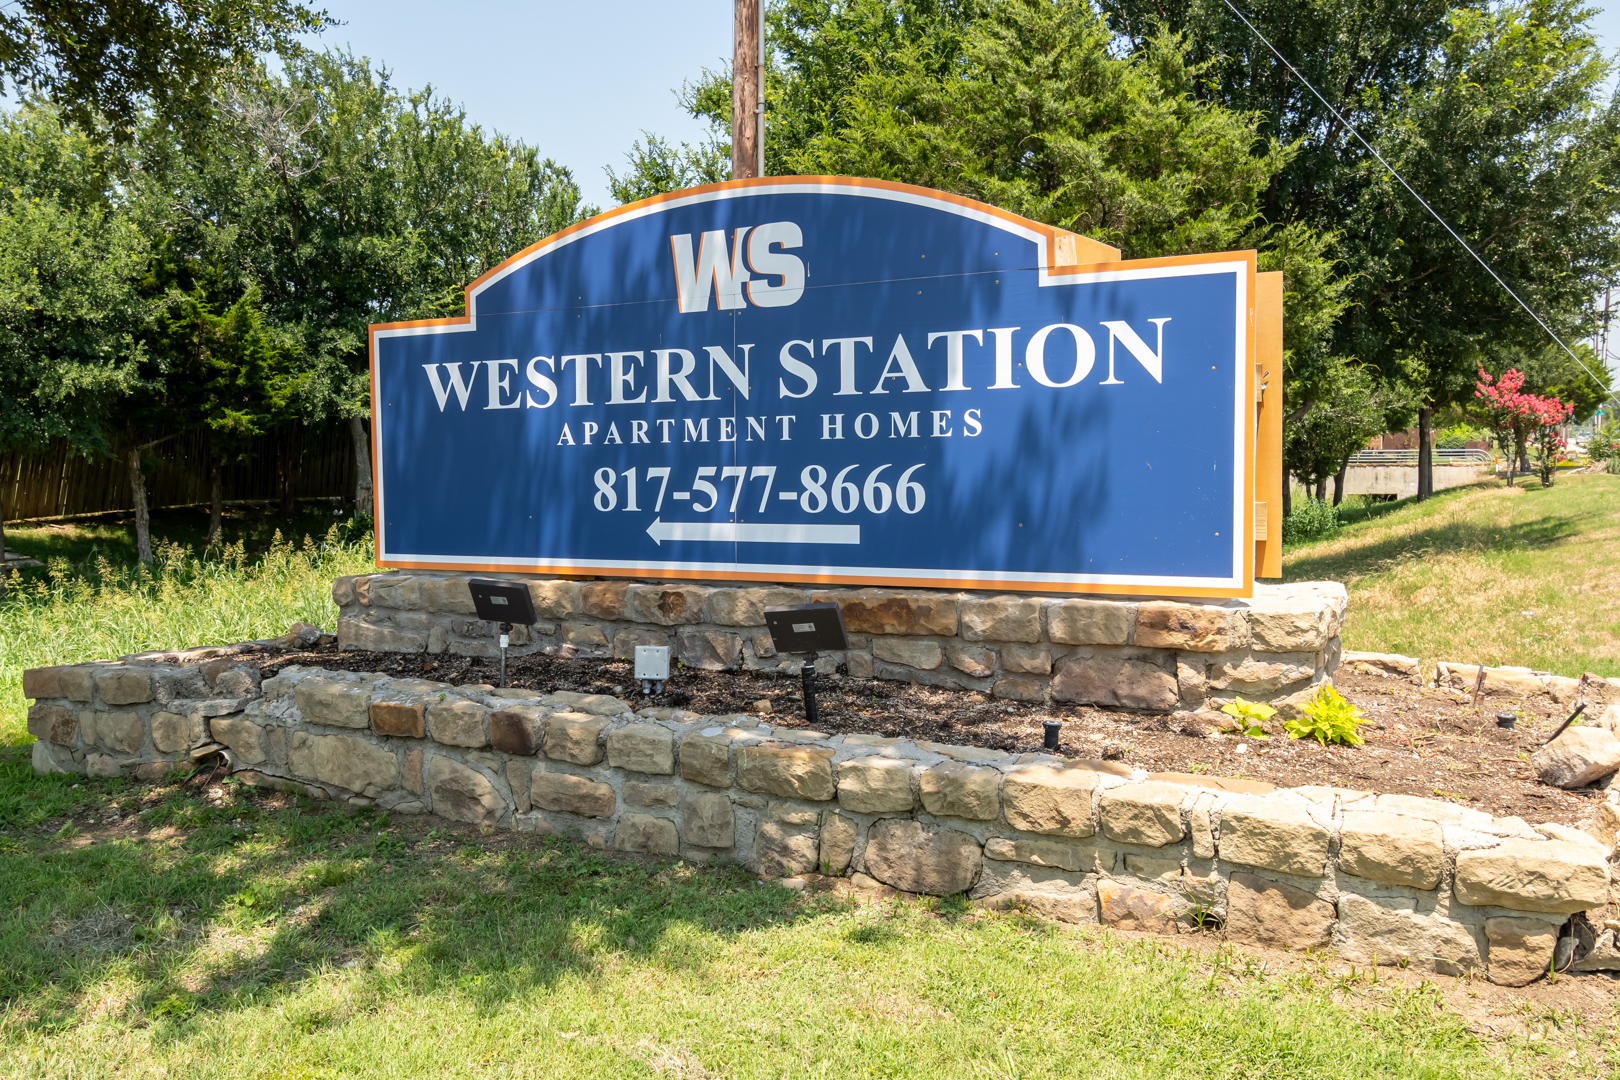 Western Station Apartment Homes